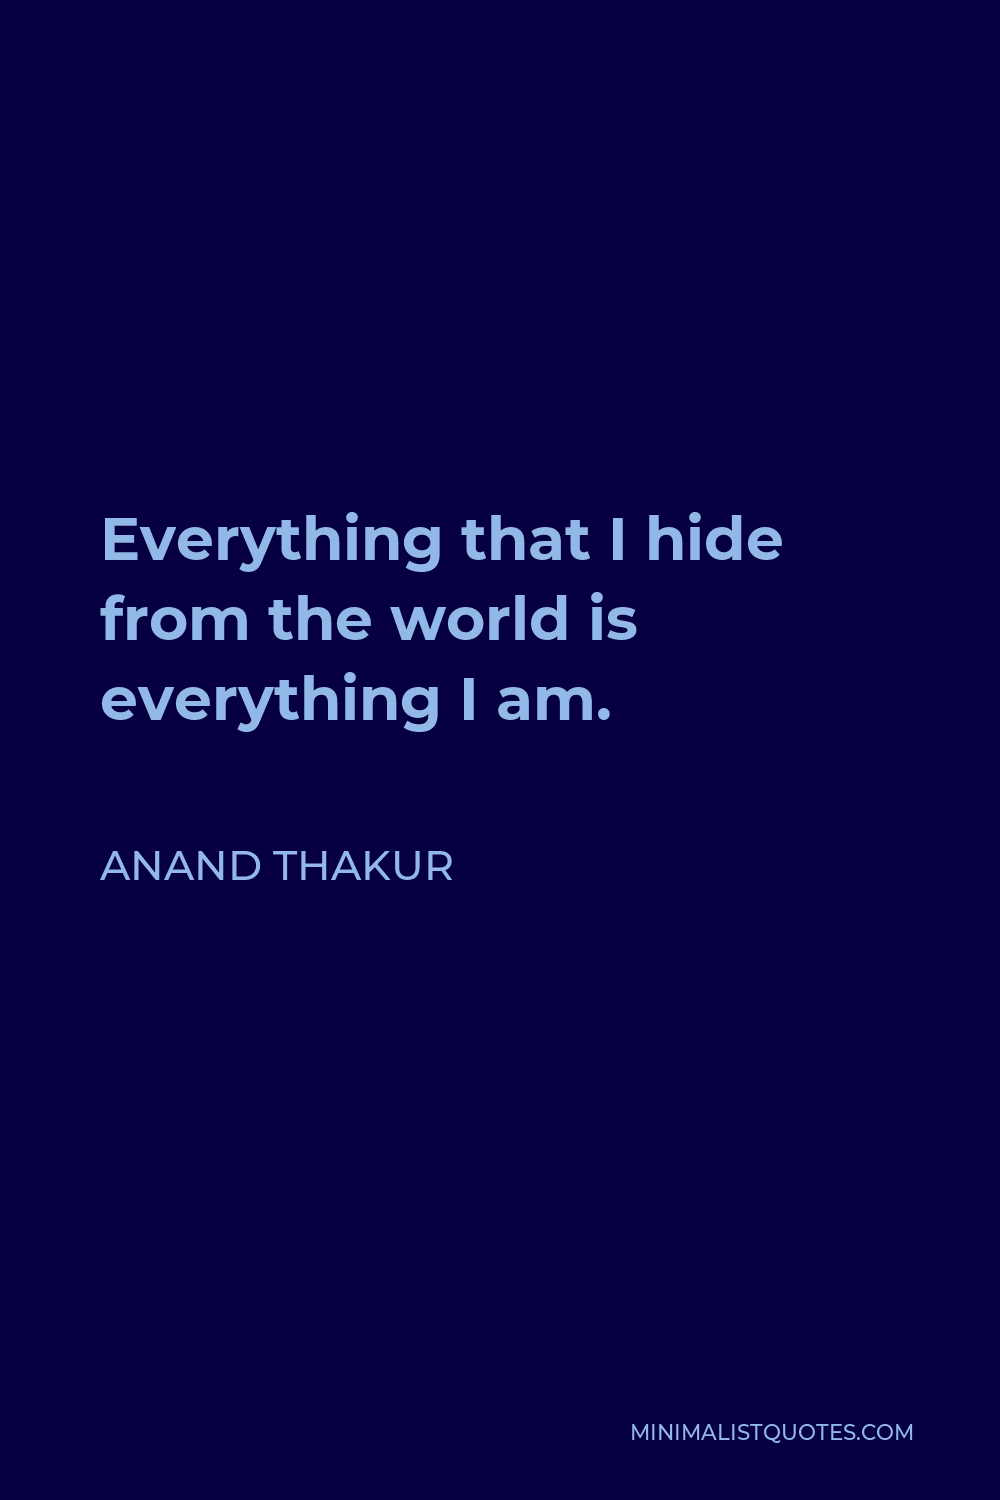 Anand Thakur Quote - Everything that I hide from the world is everything I am.